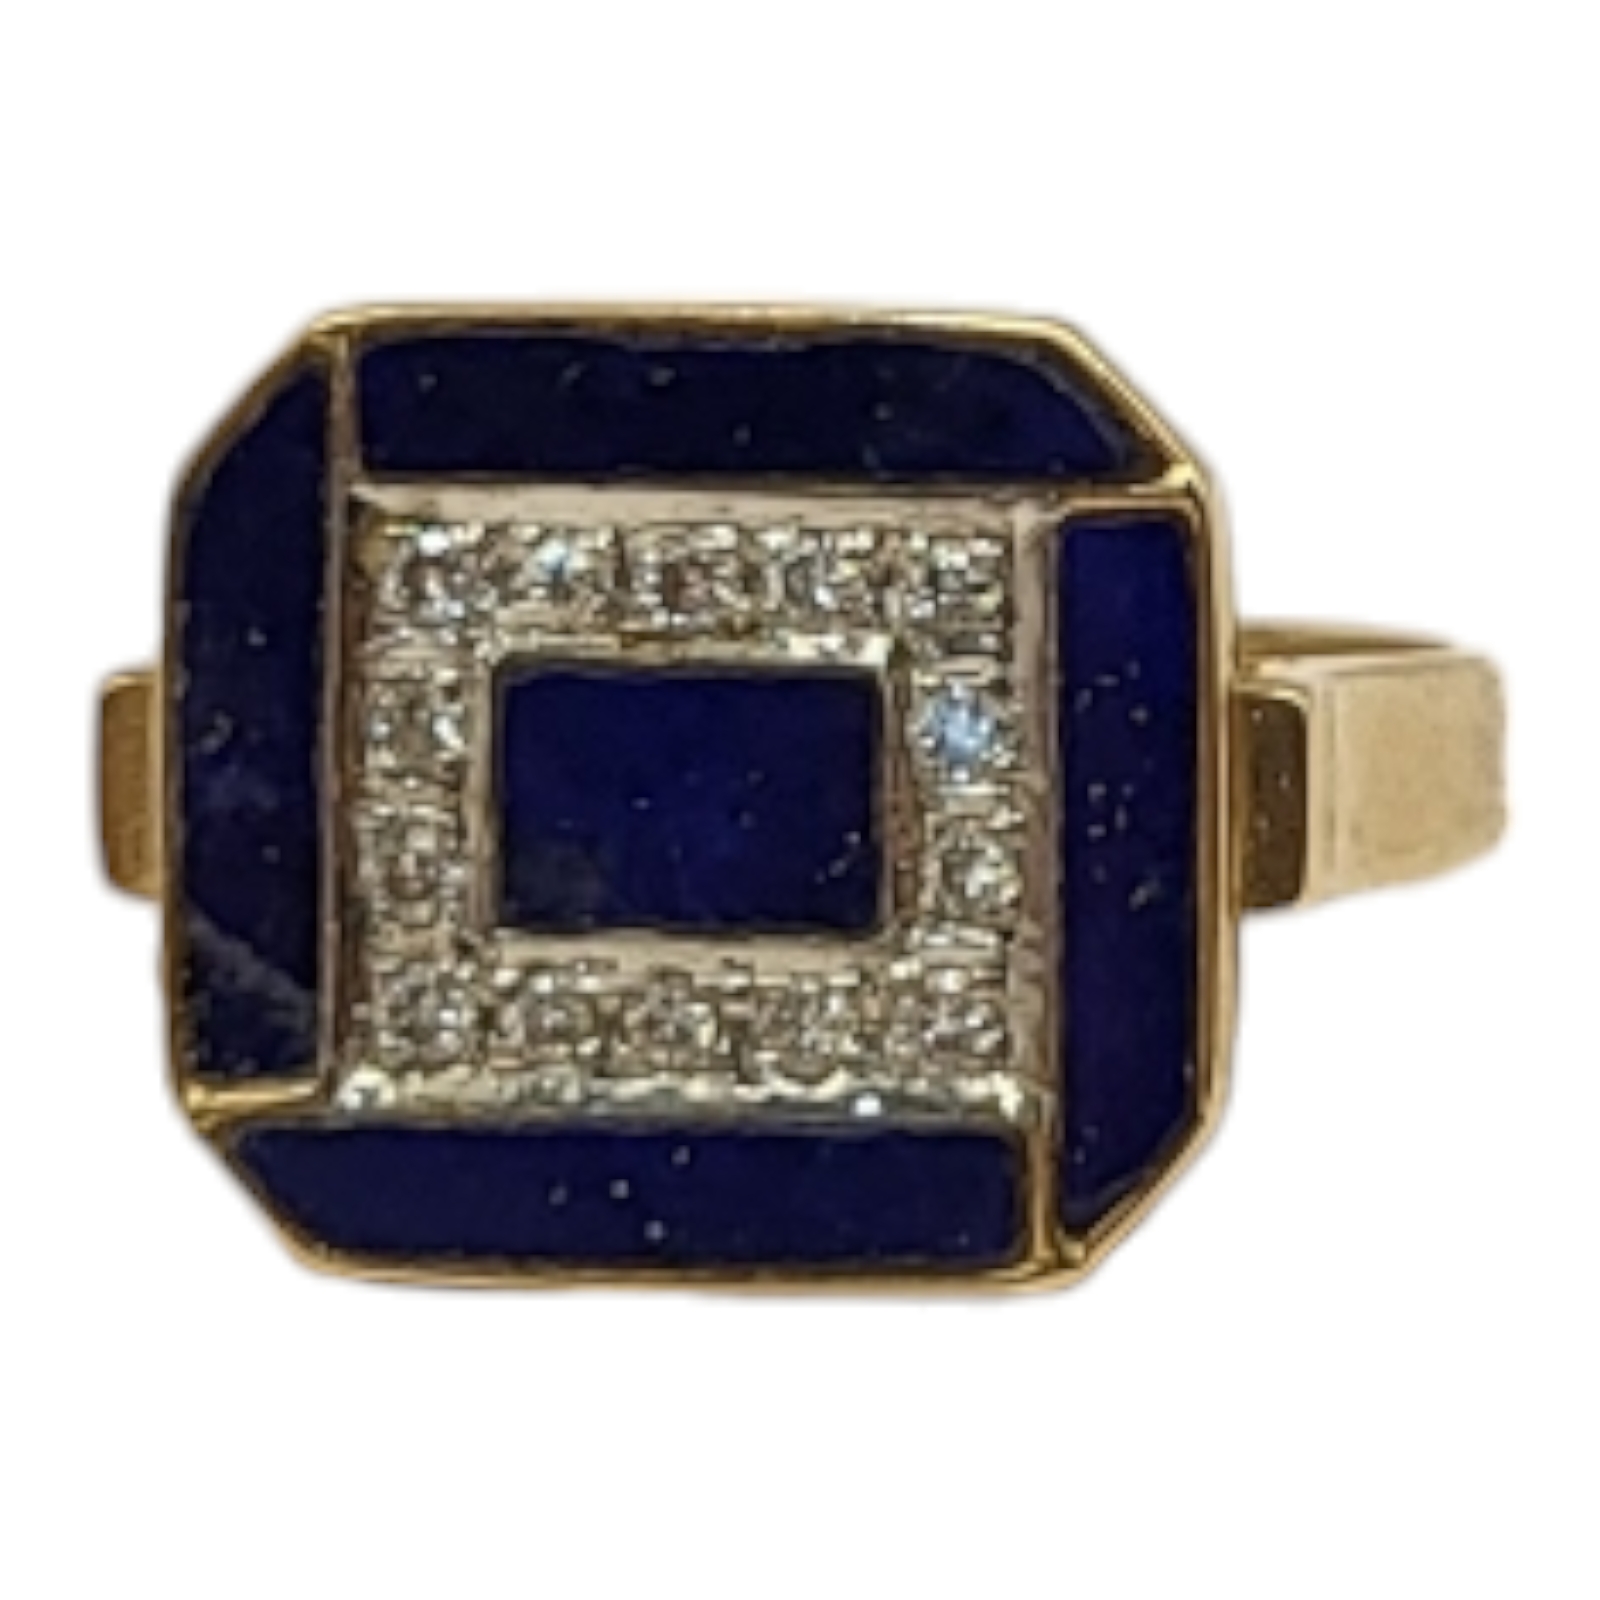 A CONTINENTAL 14CT GOLD, DIAMOND AND LAPIS LAZULI RING Having a row of round cut diamonds edged with - Image 3 of 5